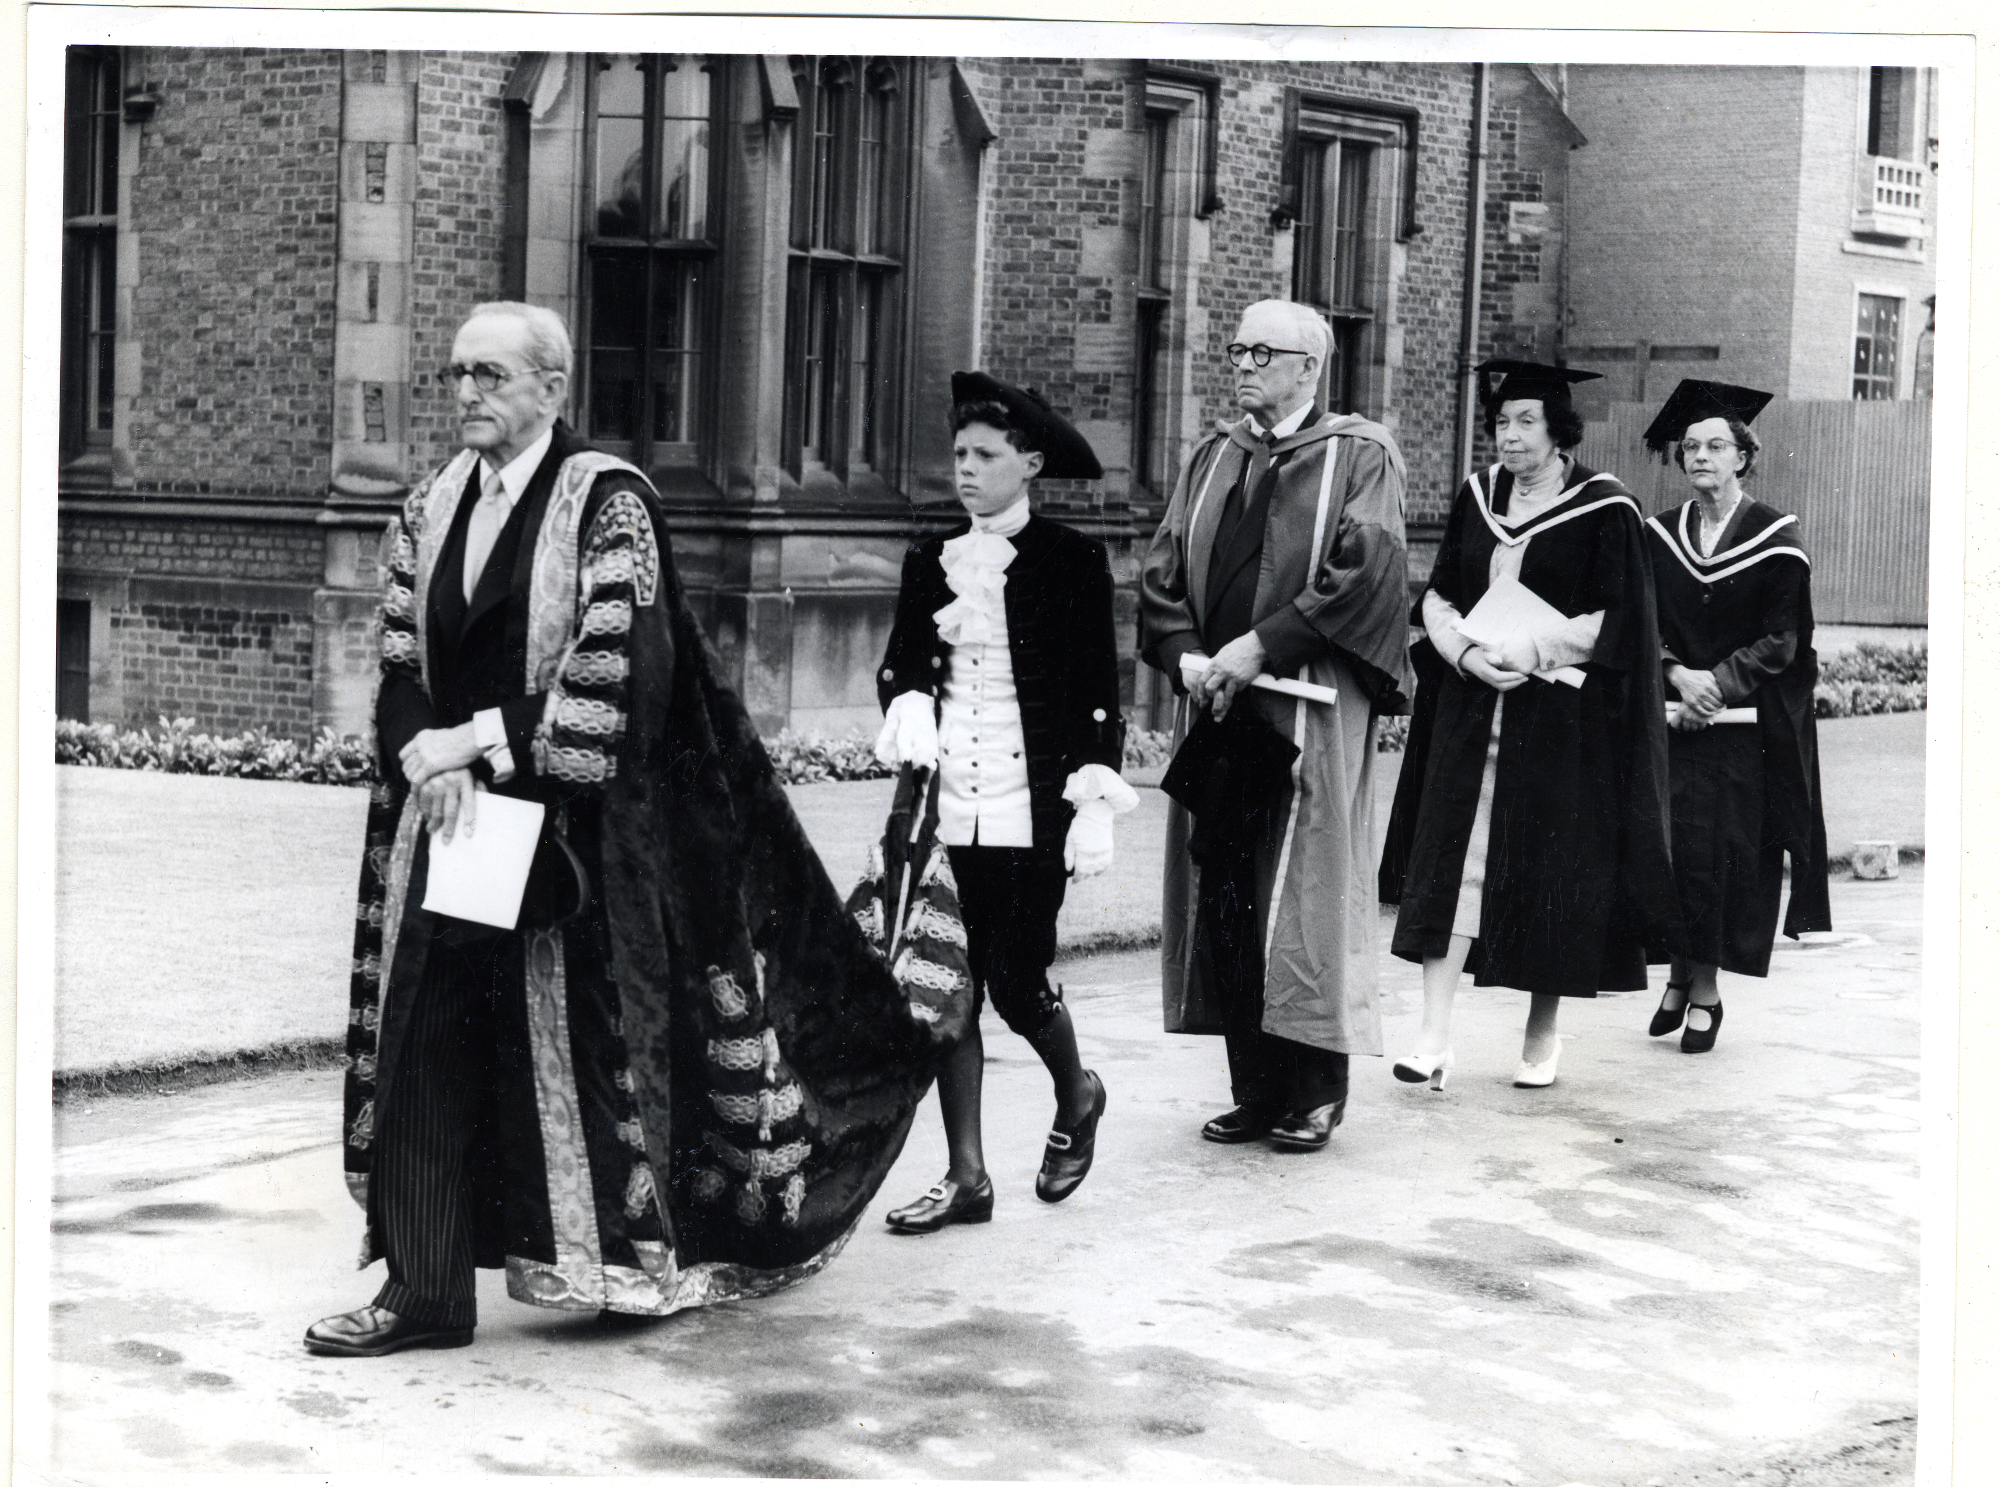 Olive Baguely (4th from the left) receives an honorary degree from QUB in 1960.